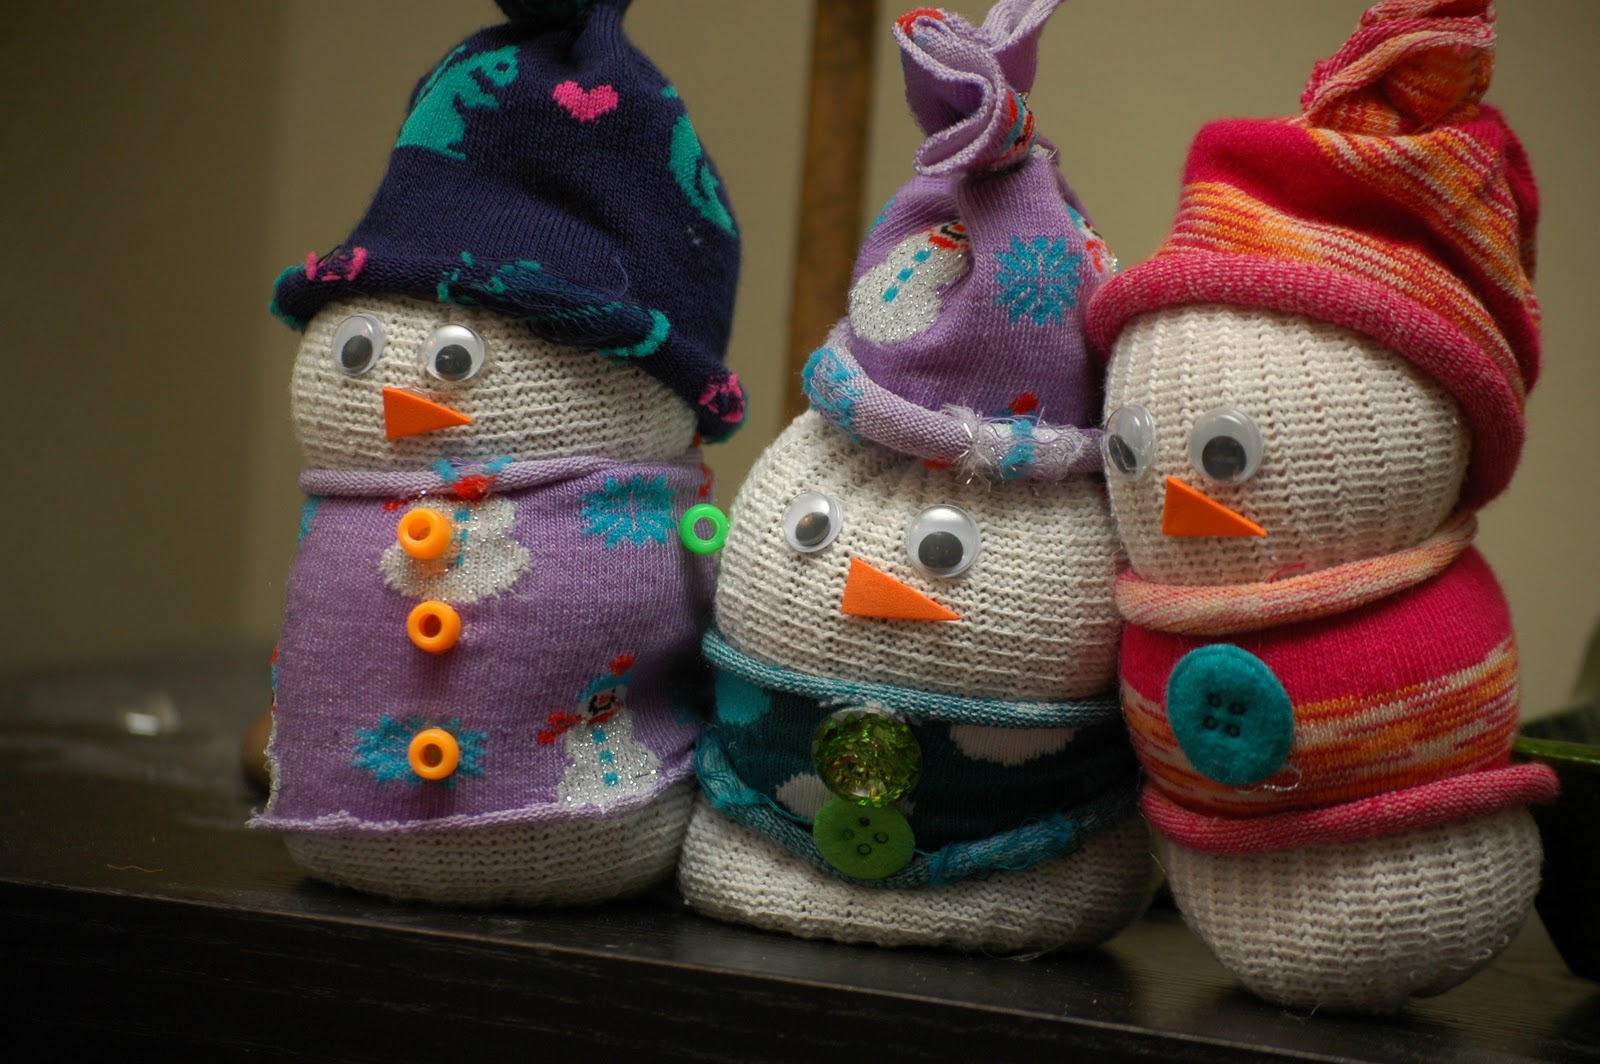 Picket Fence Design: A Snowman Sock Craft - Too Cute!